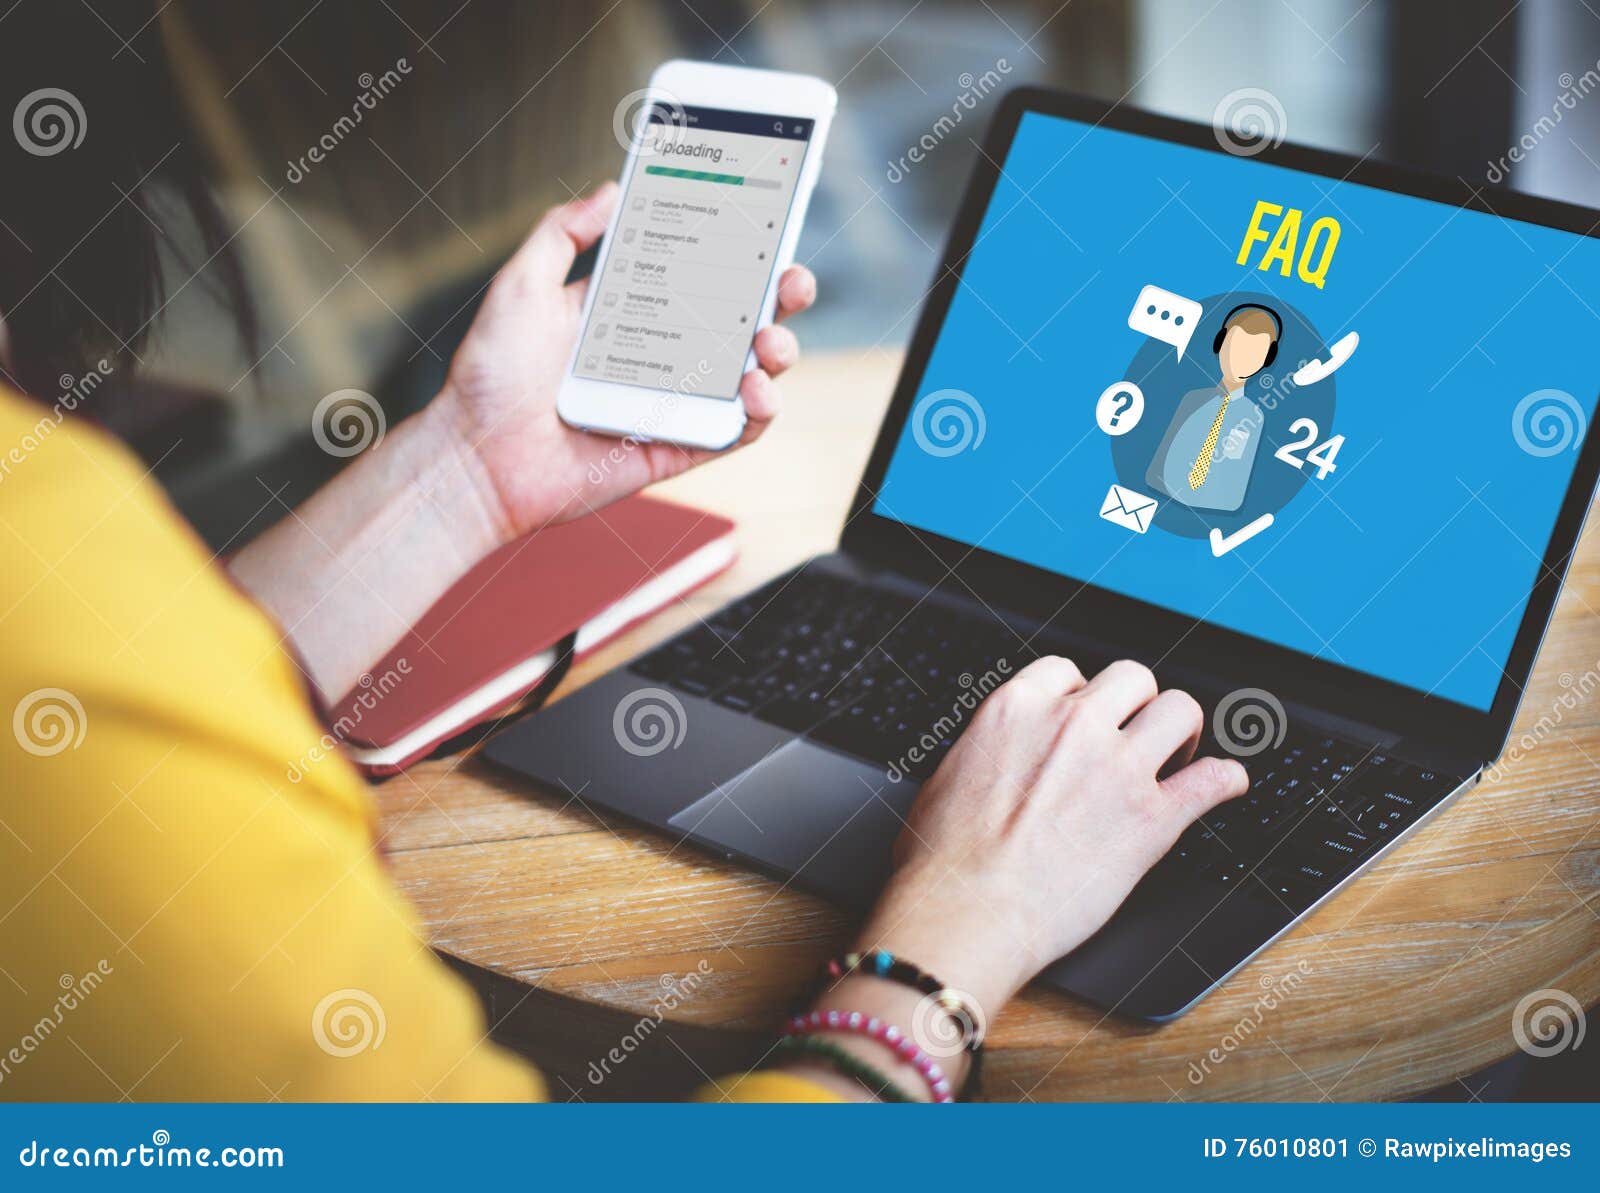 faq enquiry questions guide customer support concept